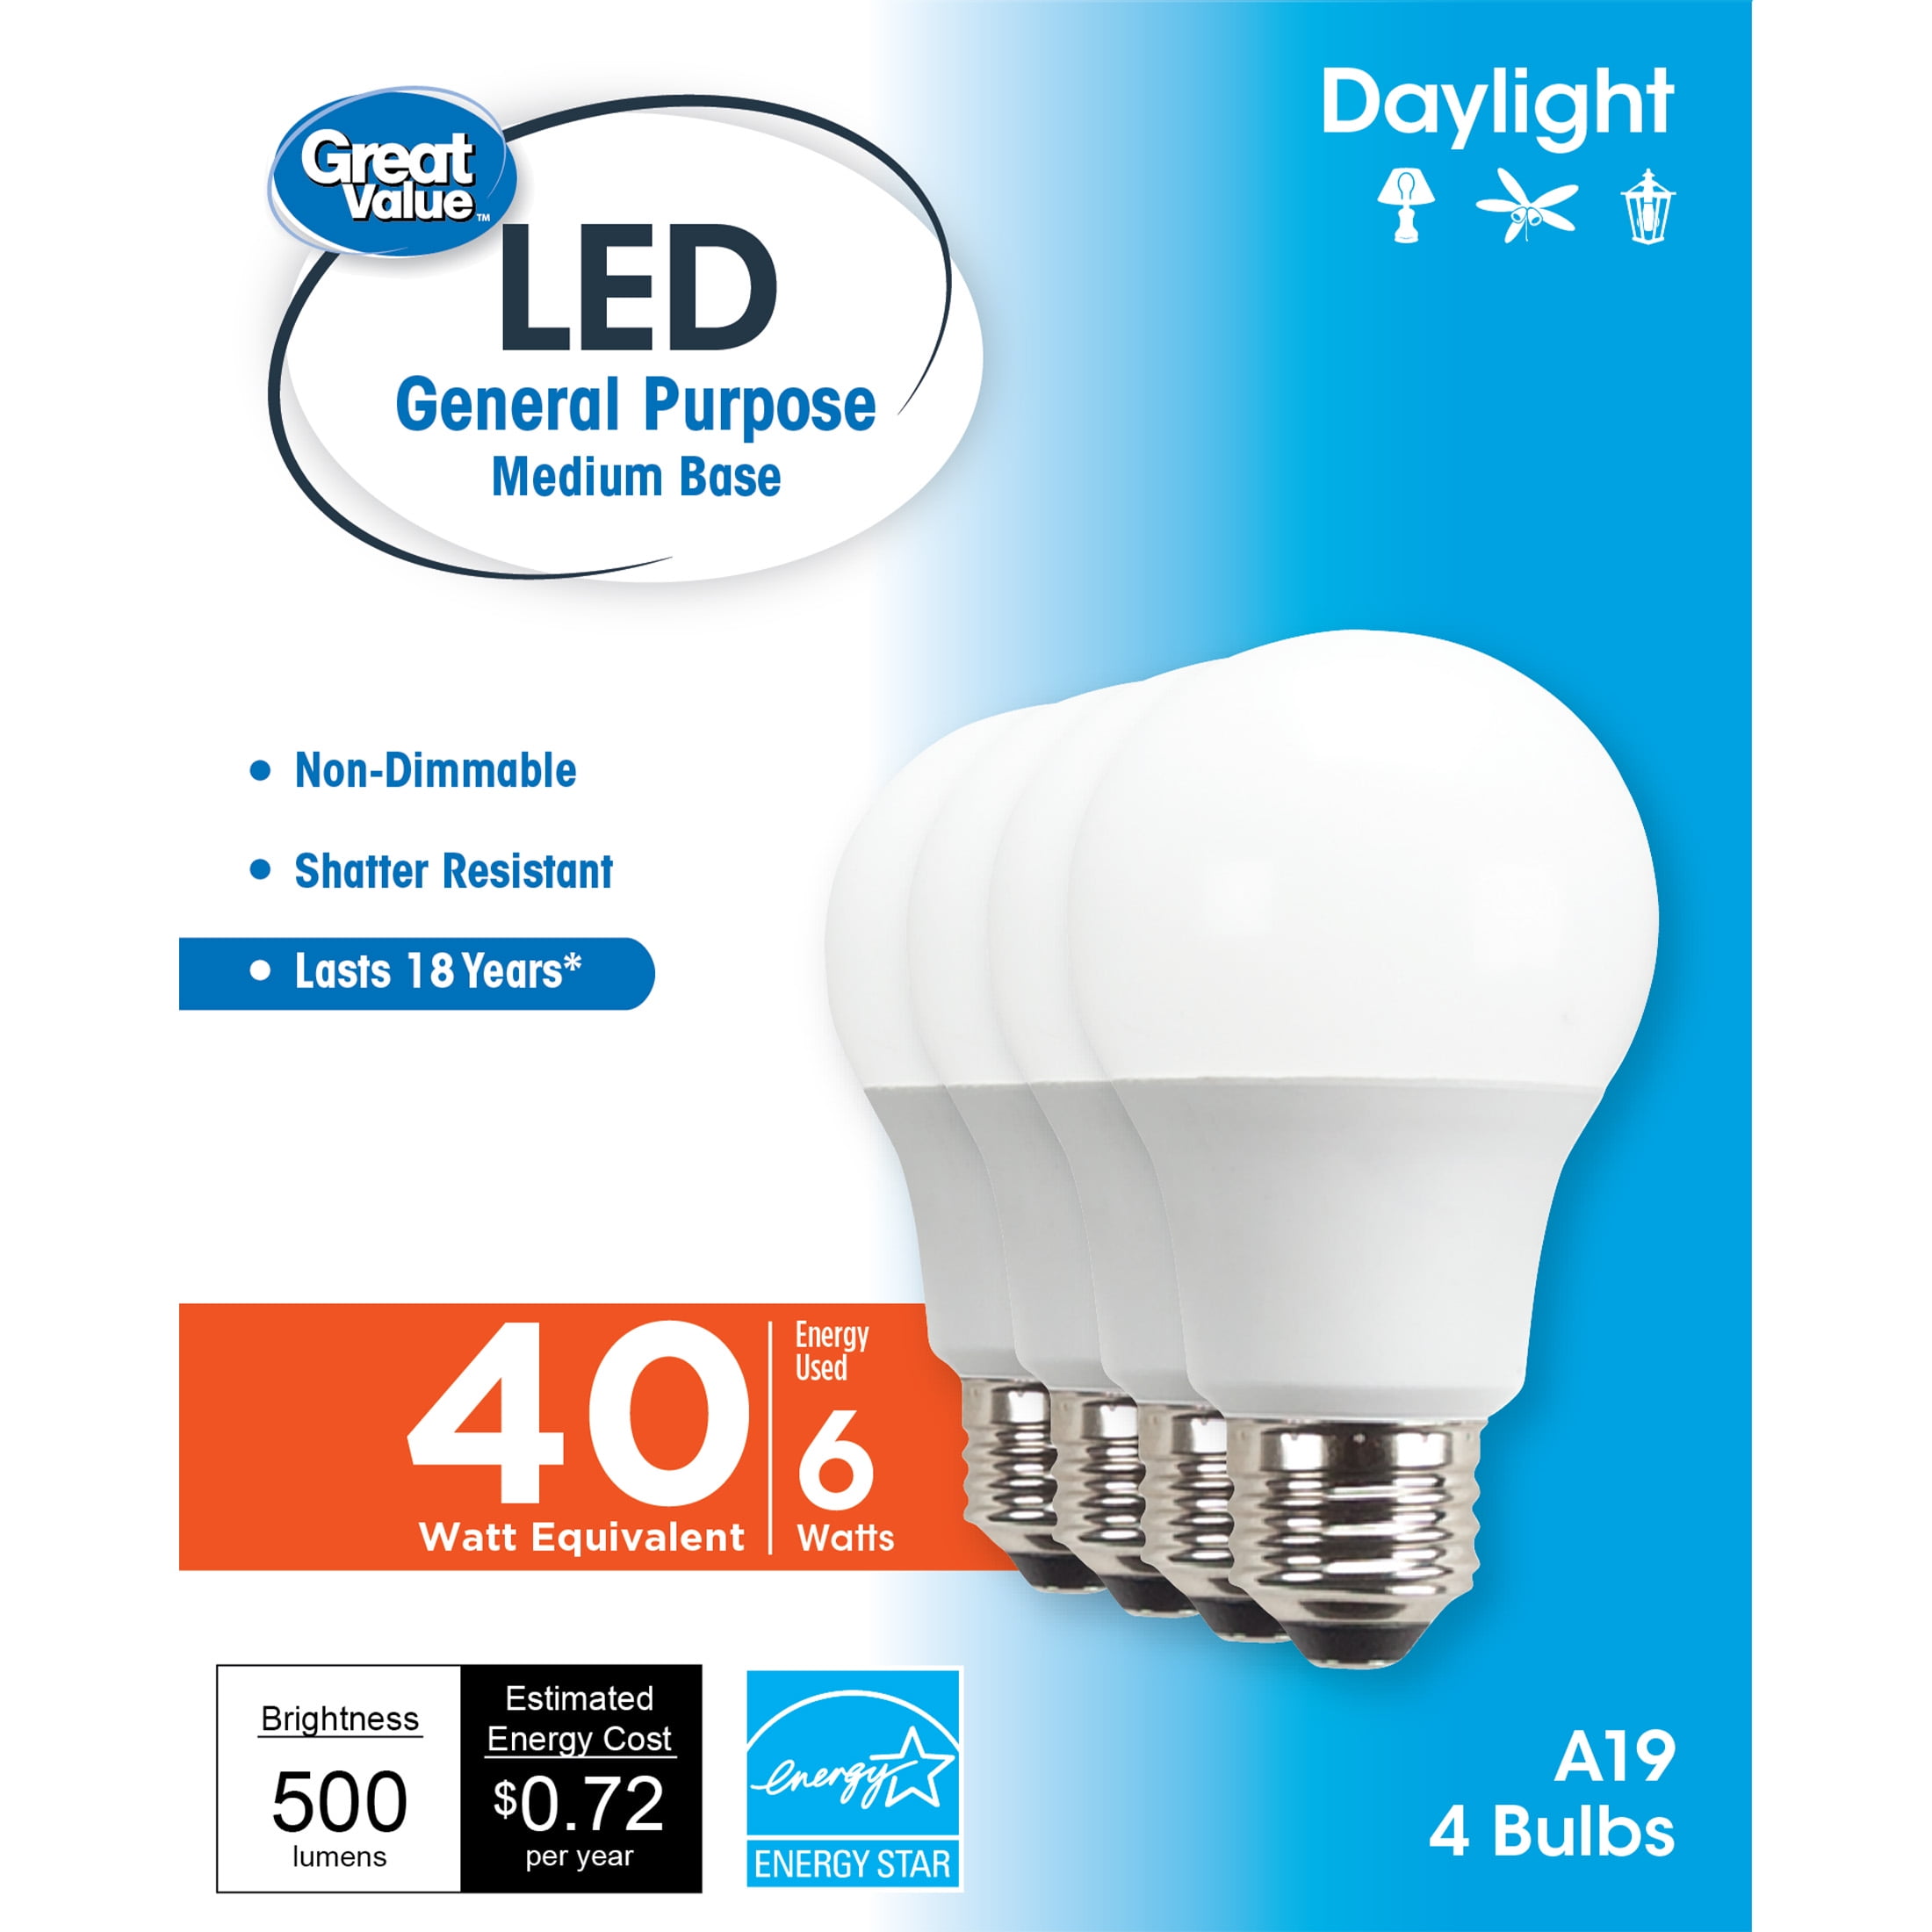 bestrating Vleien calorie Great Value LED Light Bulb, 6W (40W Equivalent) A19 General Purpose Lamp  E26 Medium Base, Non-dimmable, Daylight, 4-Pack - Walmart.com